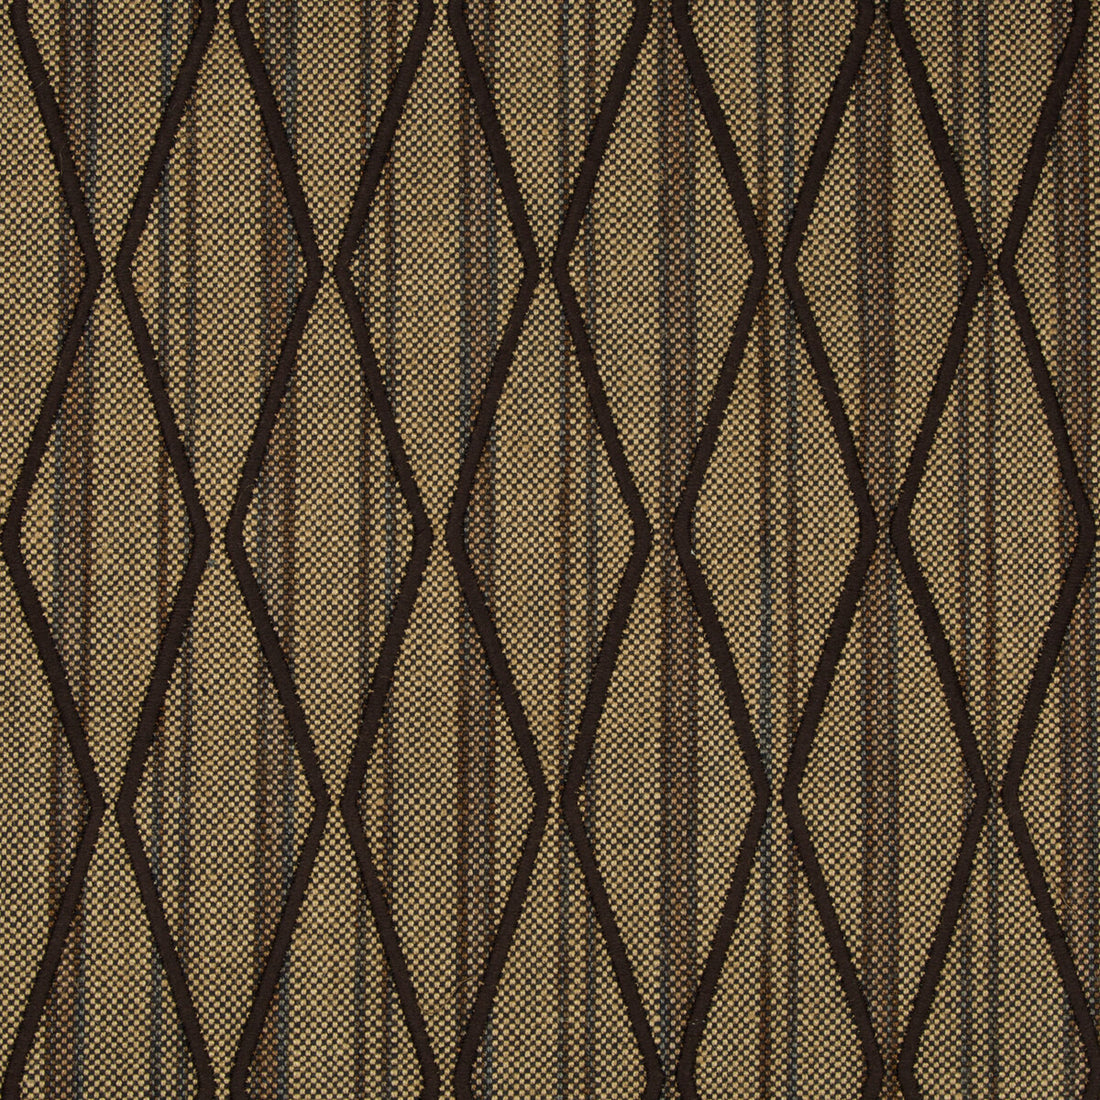 Omo Embroidery fabric in beige/cocoa color - pattern 2017149.668.0 - by Lee Jofa in the Merkato collection